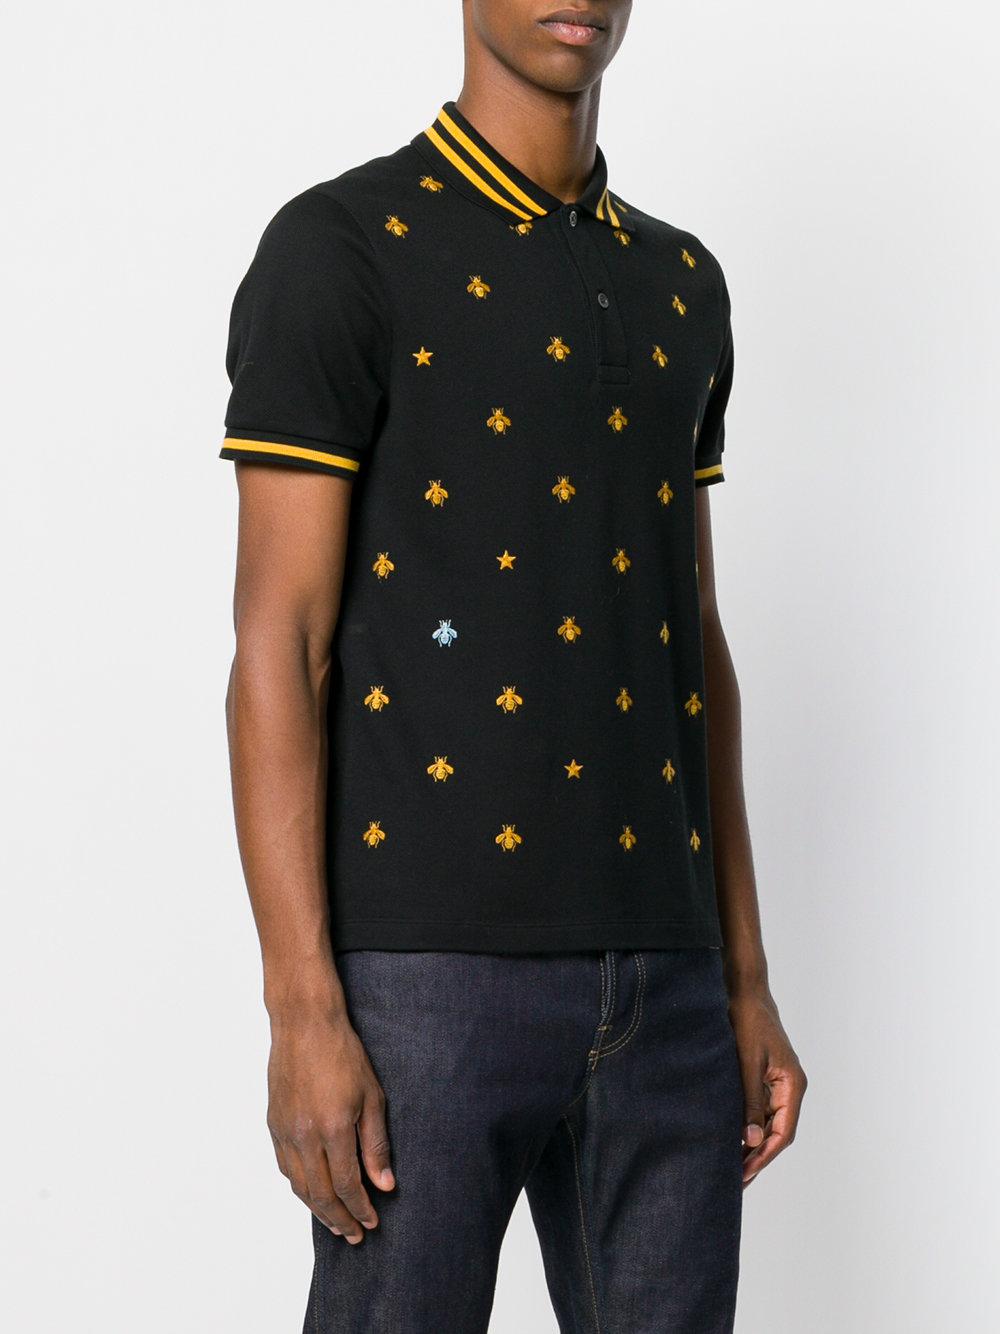 Gucci Cotton Embroidered Bee Polo Shirt in Black for Men Lyst